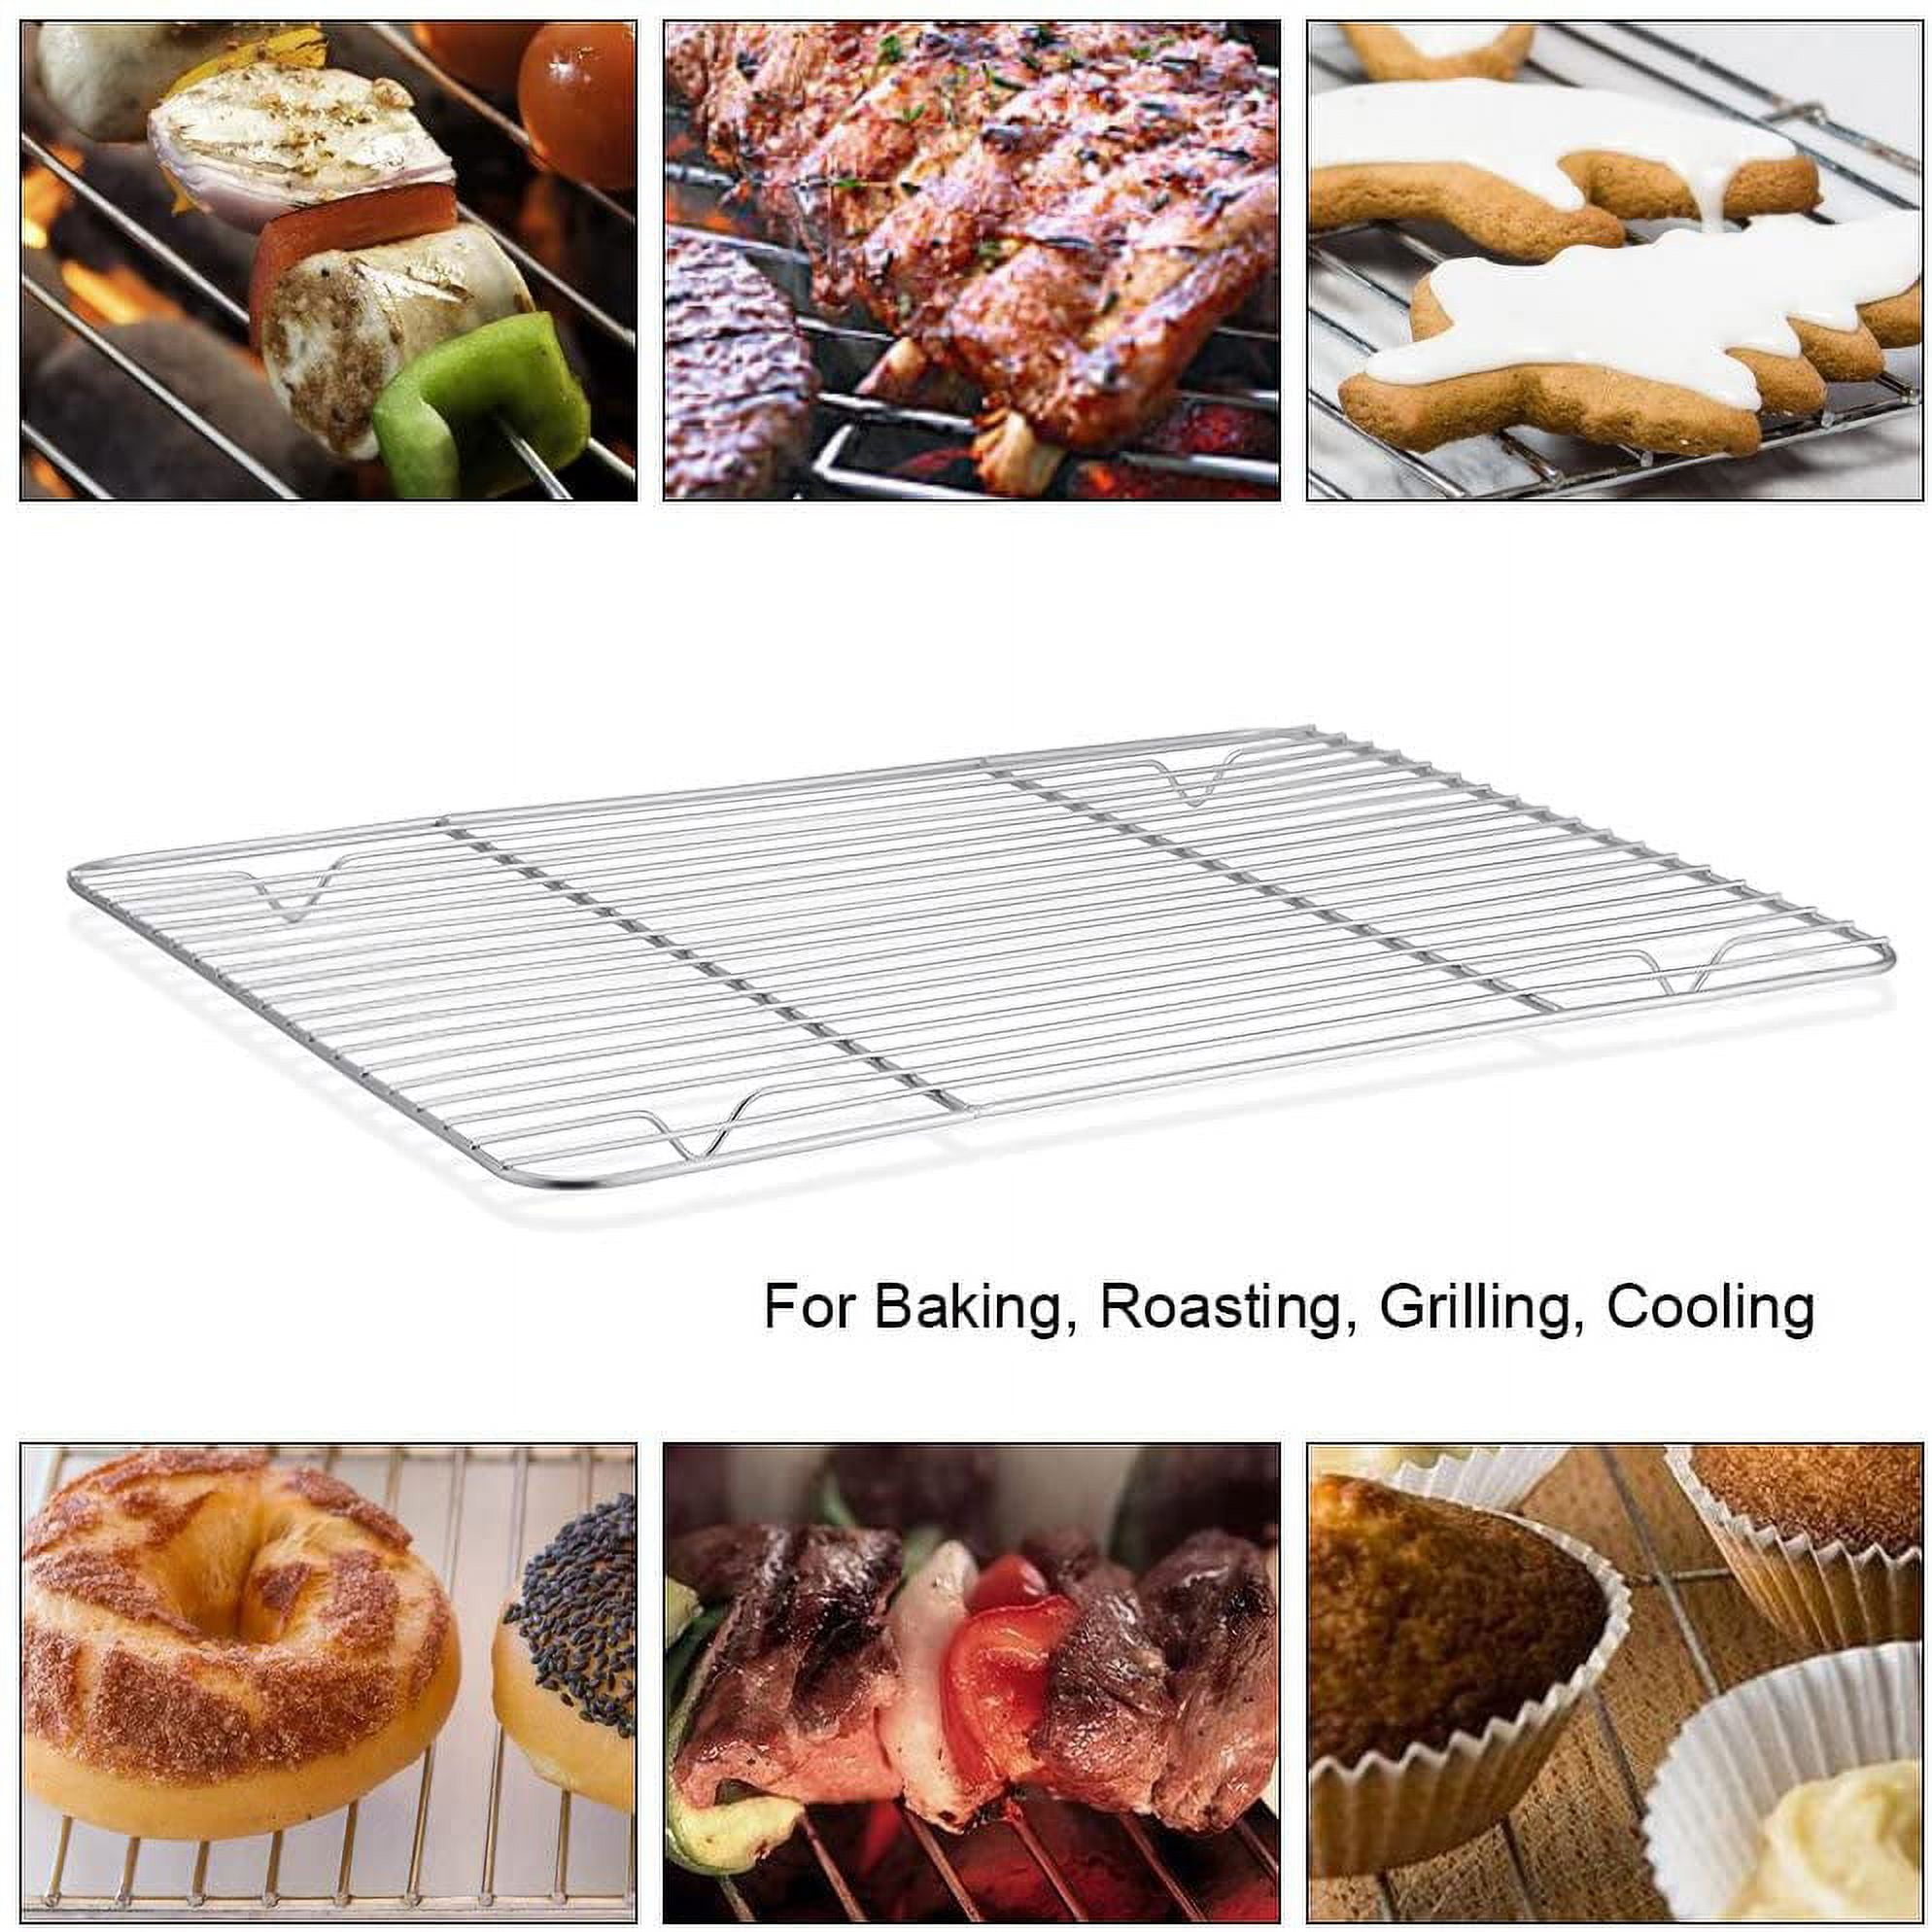 Baking Rack, Cooling Roasting Rack Stainless Steel for Baking Sheet Oven  Pan, Healthy & Rust Free, Oven & Dishwasher Safe - Set of 2 (9.7'' x 7.3'')  